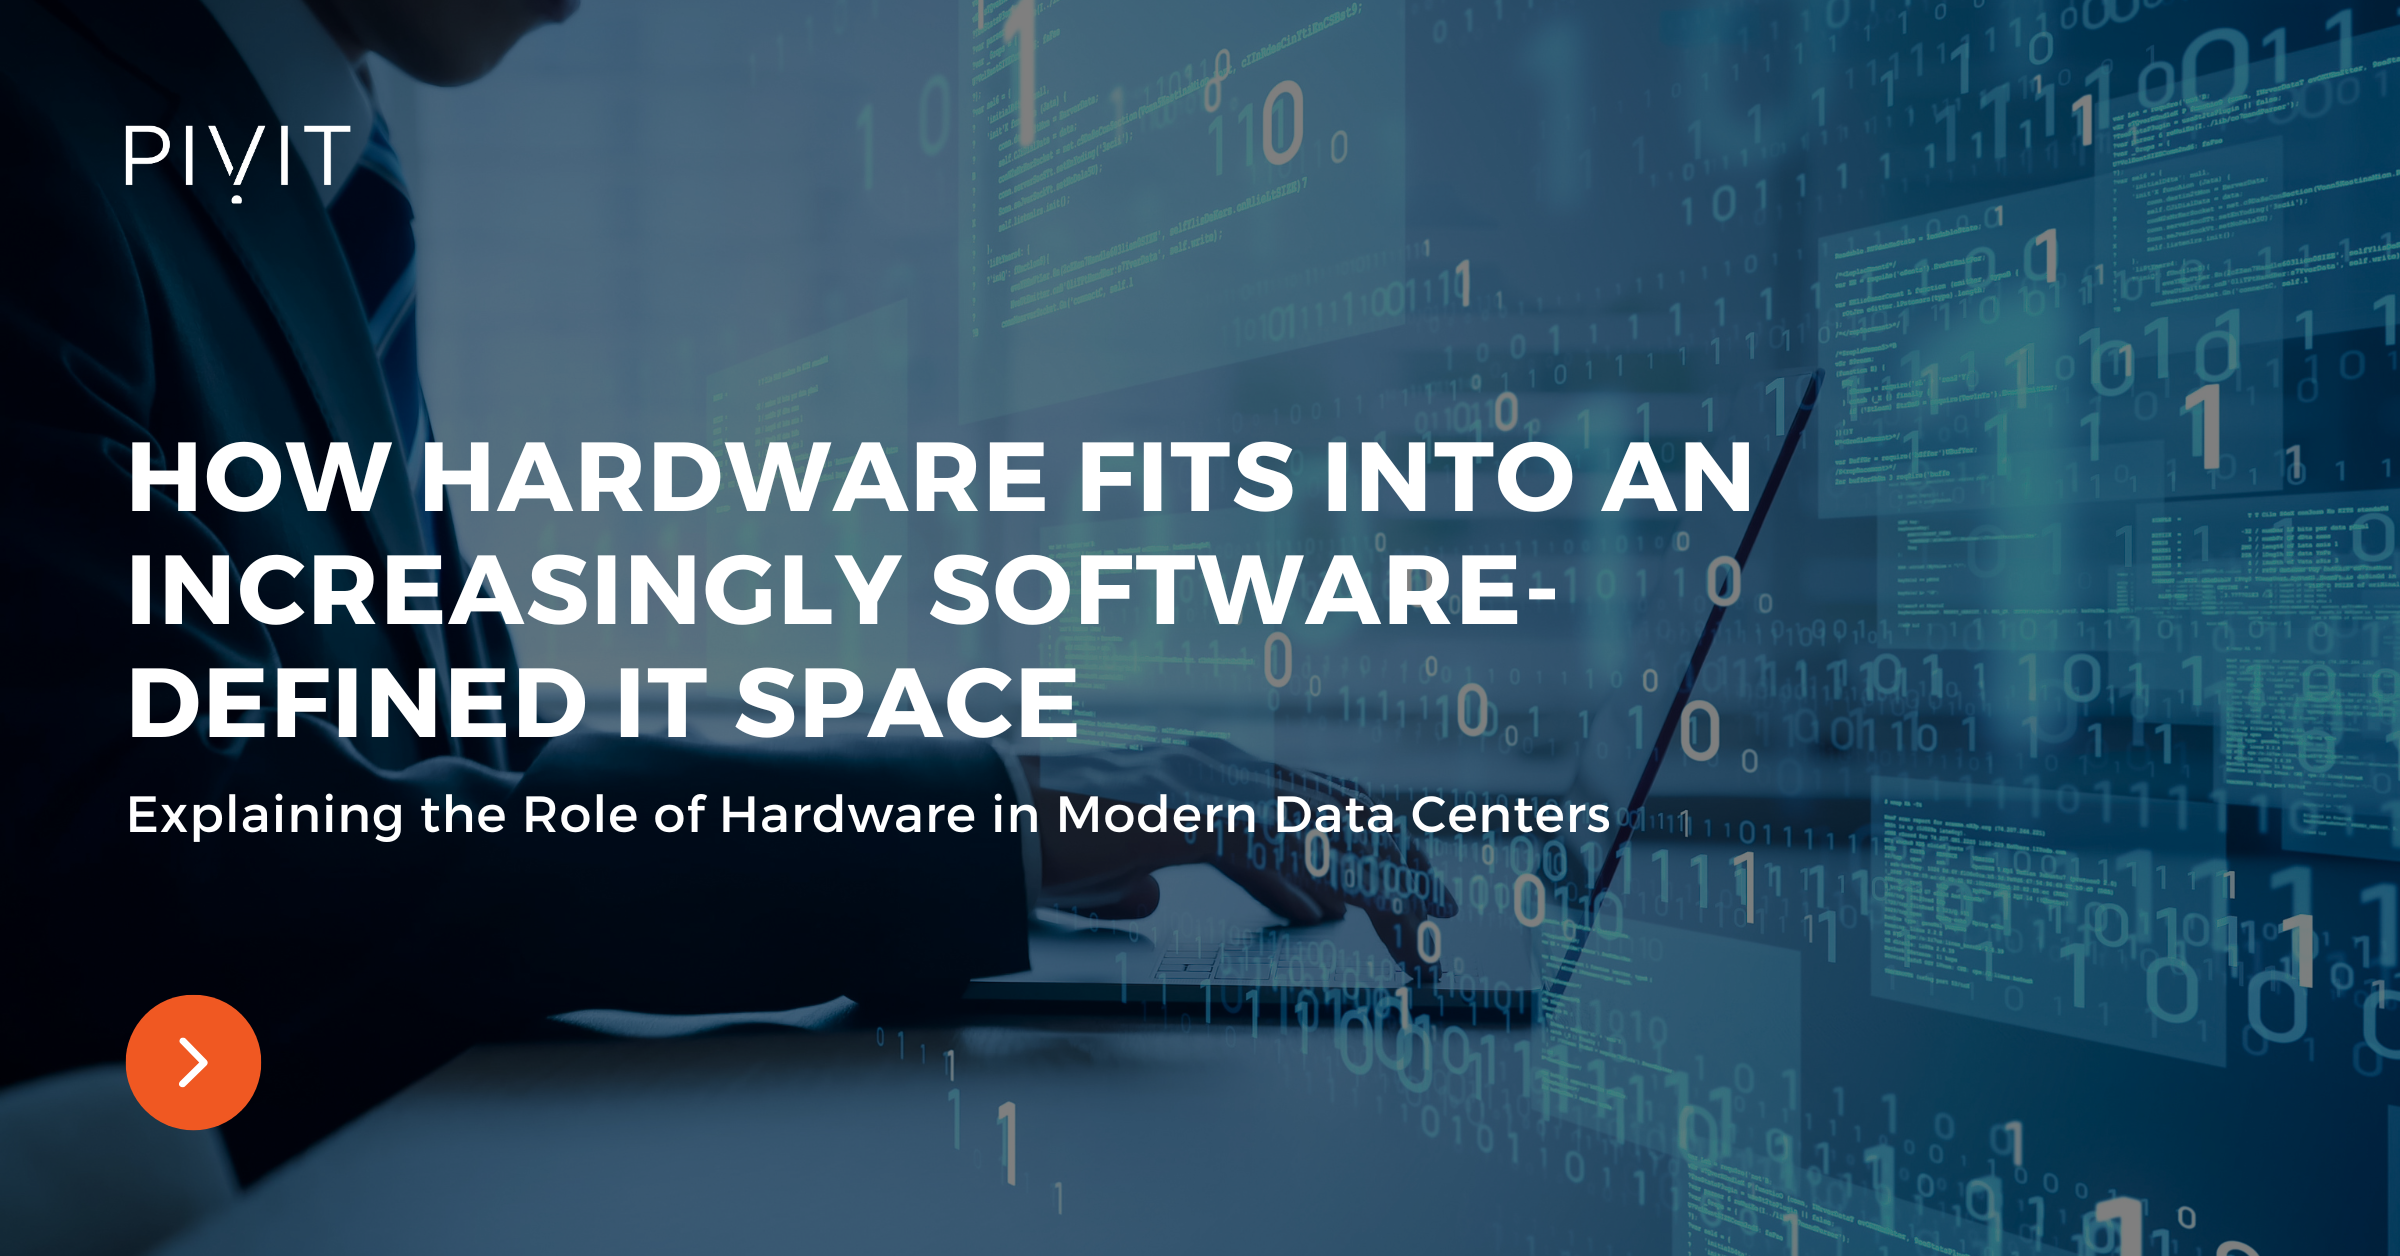 How Hardware Fits Into an Increasingly Software-Defined IT Space